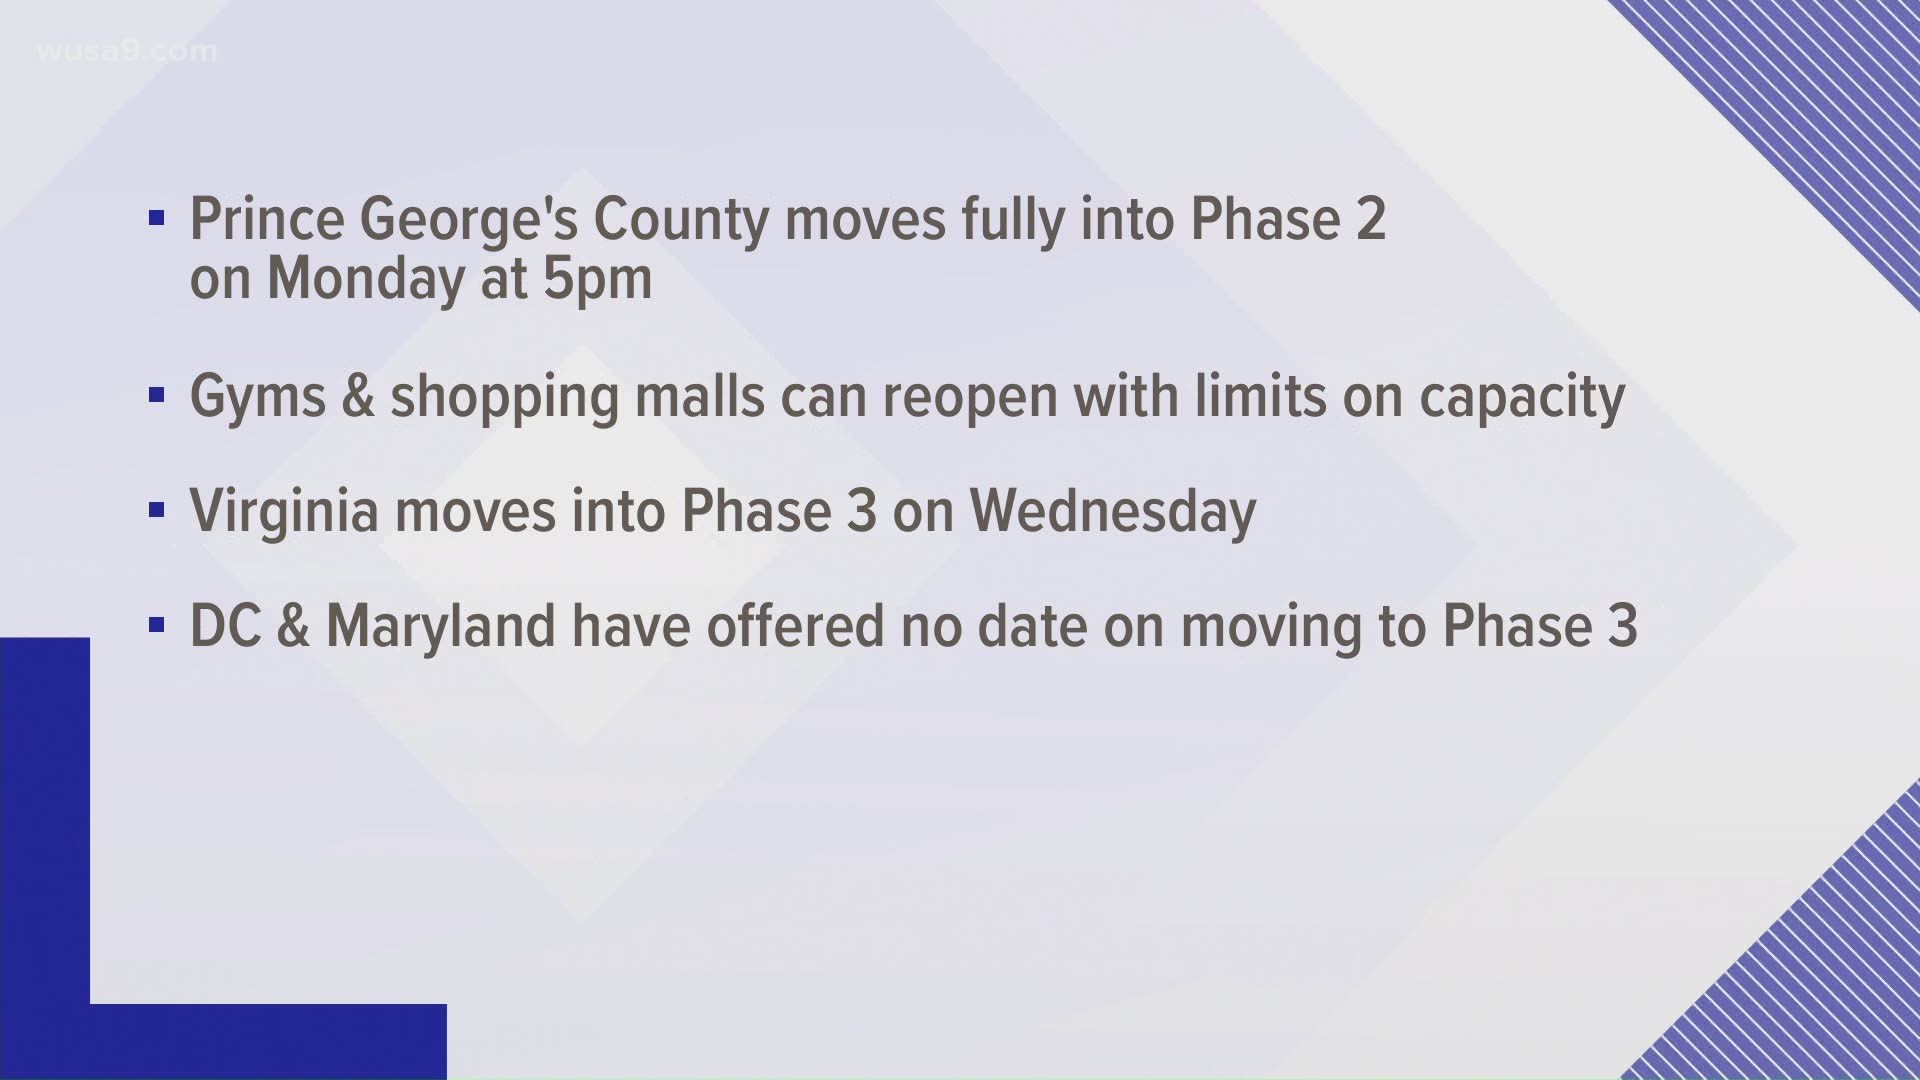 The County will move from a modified Phase 2 reopening to full Phase 2 reopening on June 29.